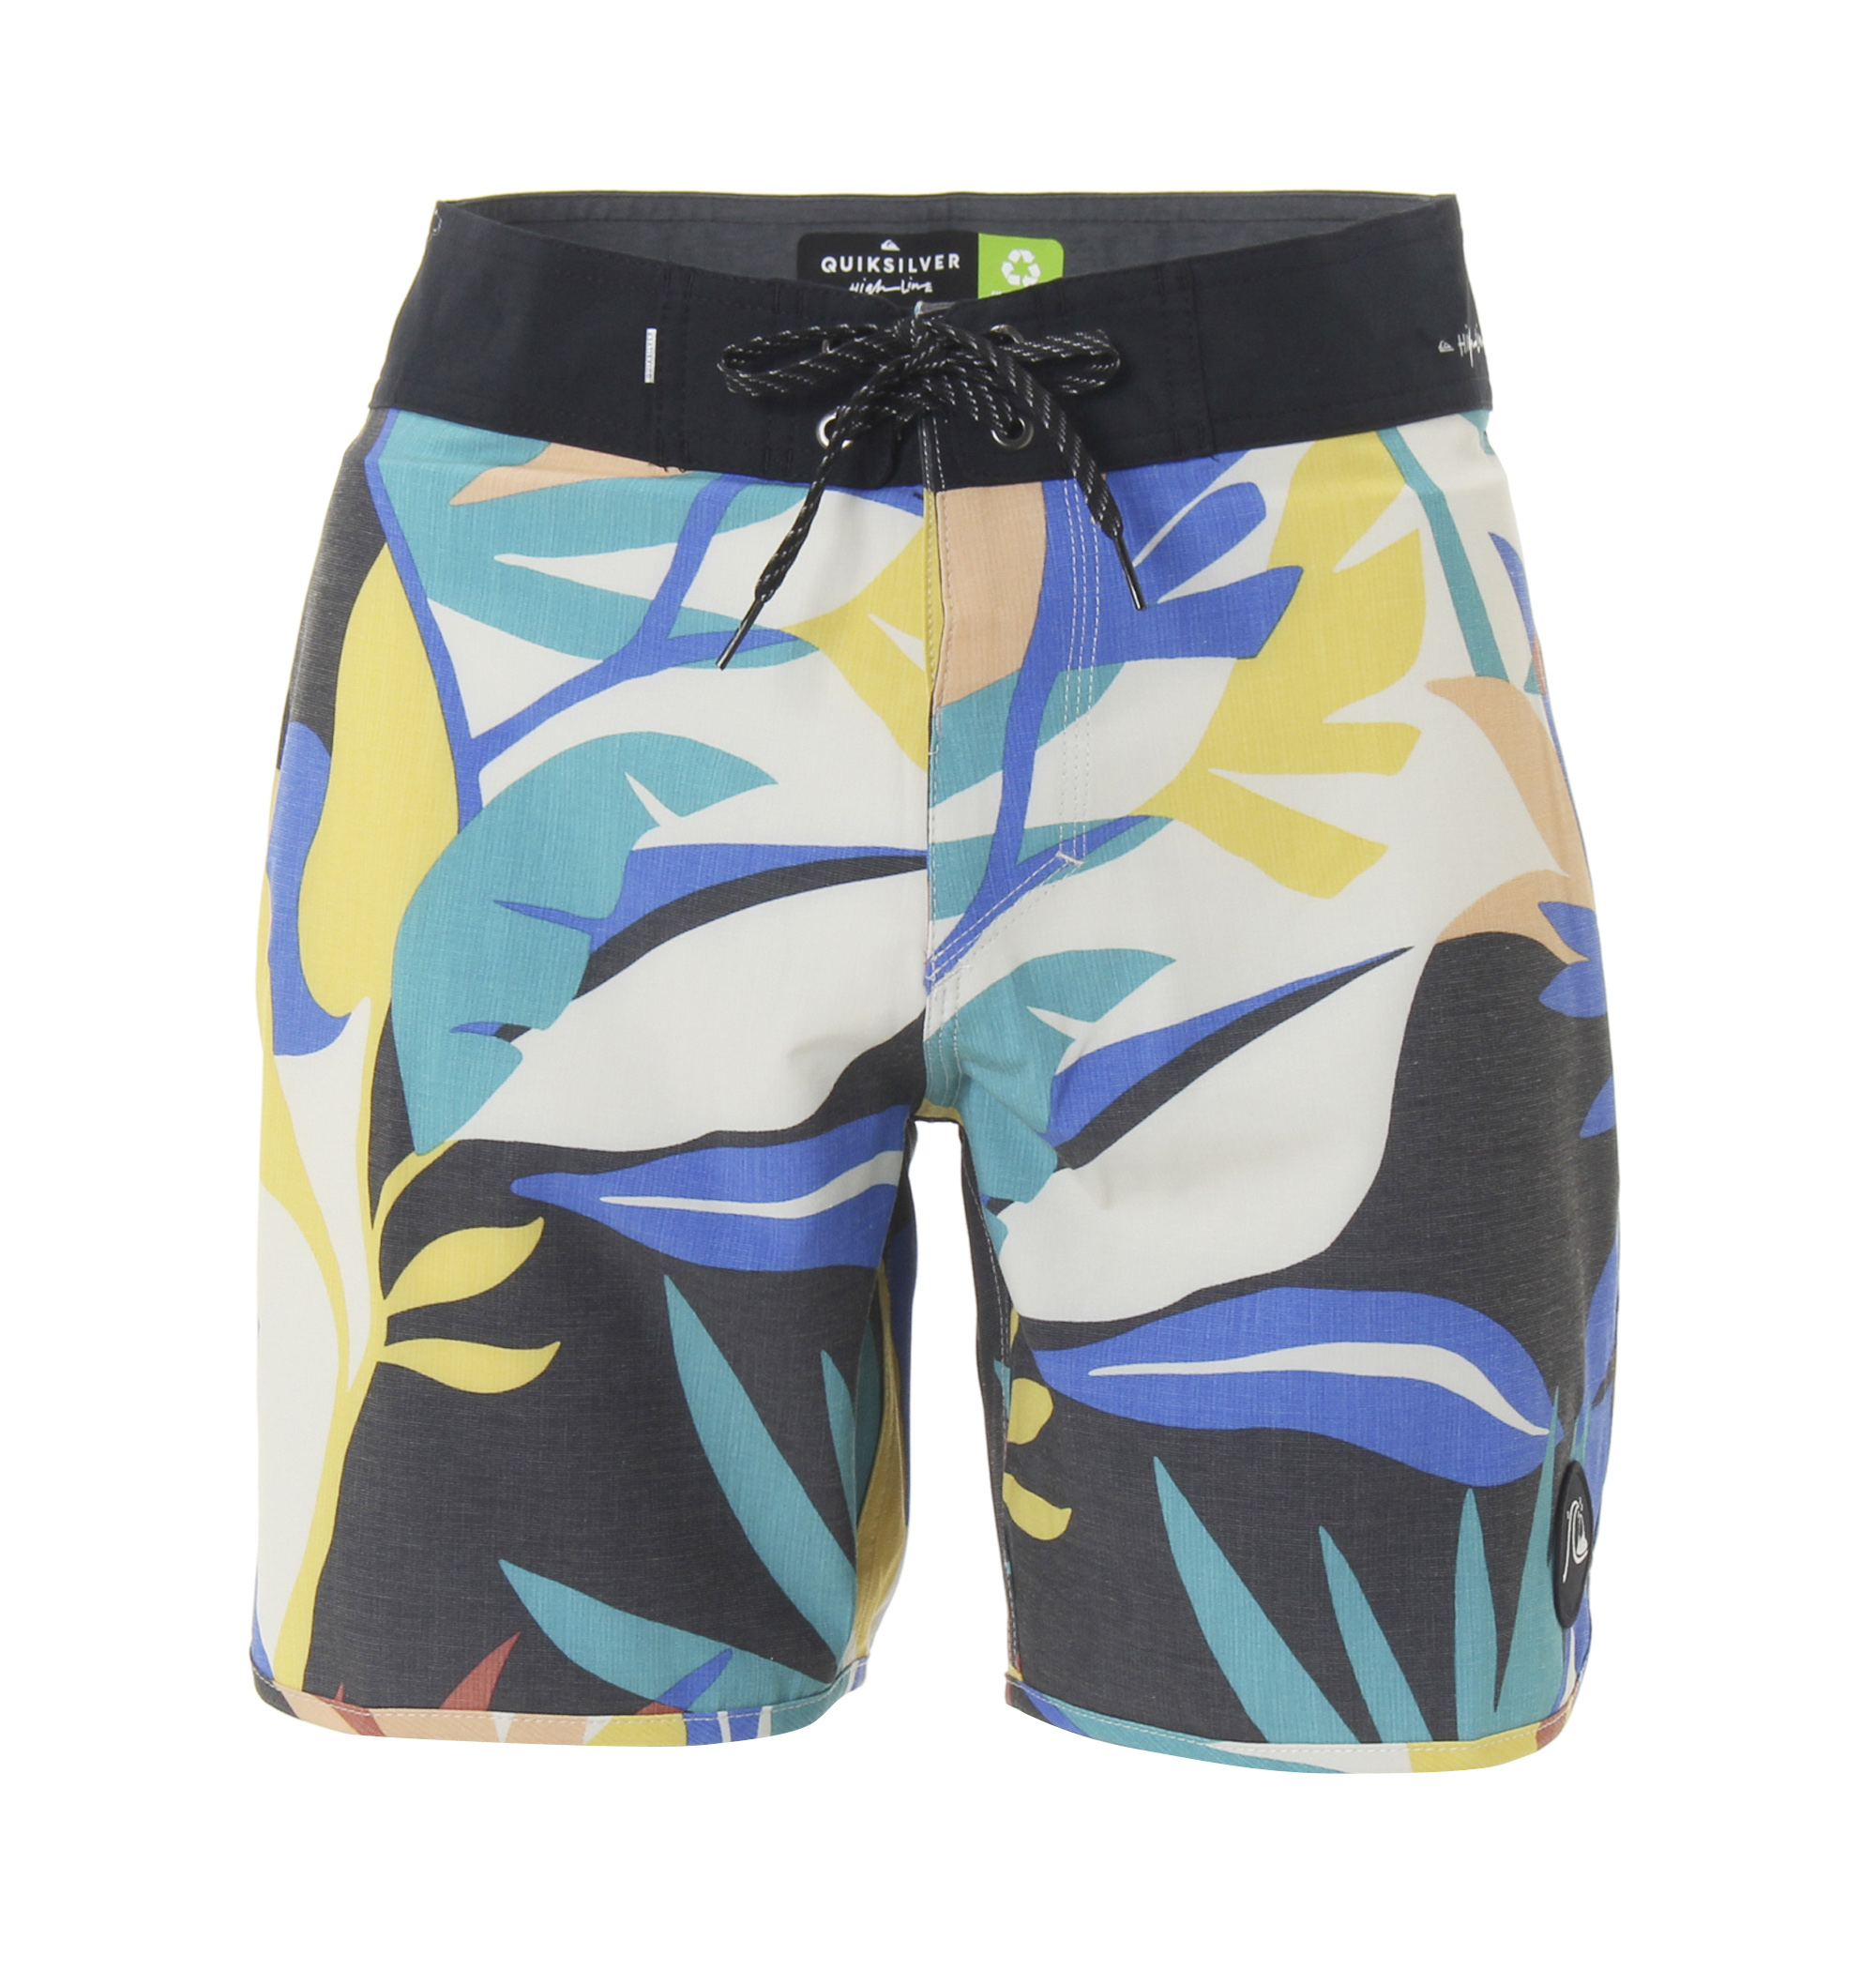 ＜Quiksilver＞ HIGHLINE TROPICAL FLOW 18 多彩な色使いのボタニカル柄が印象的なボードショーツ